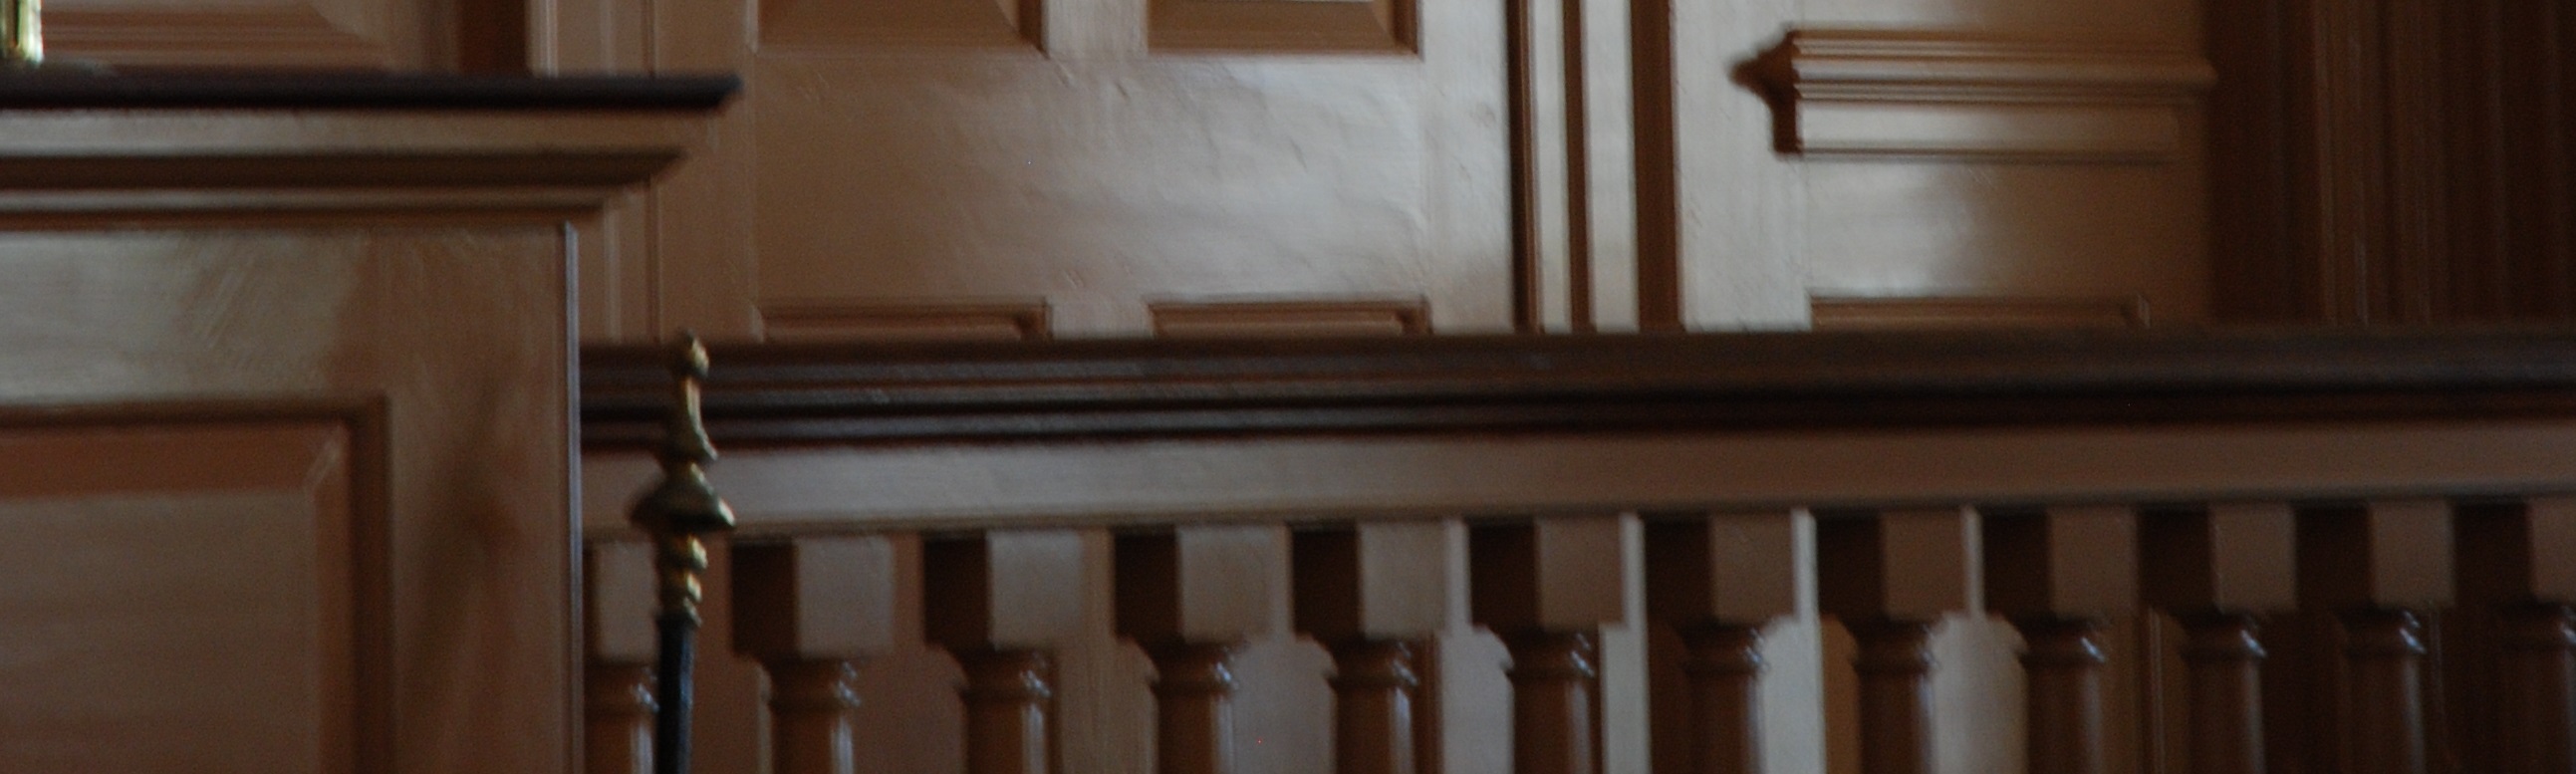 A Wooden Frame With Walls in a Court Room One